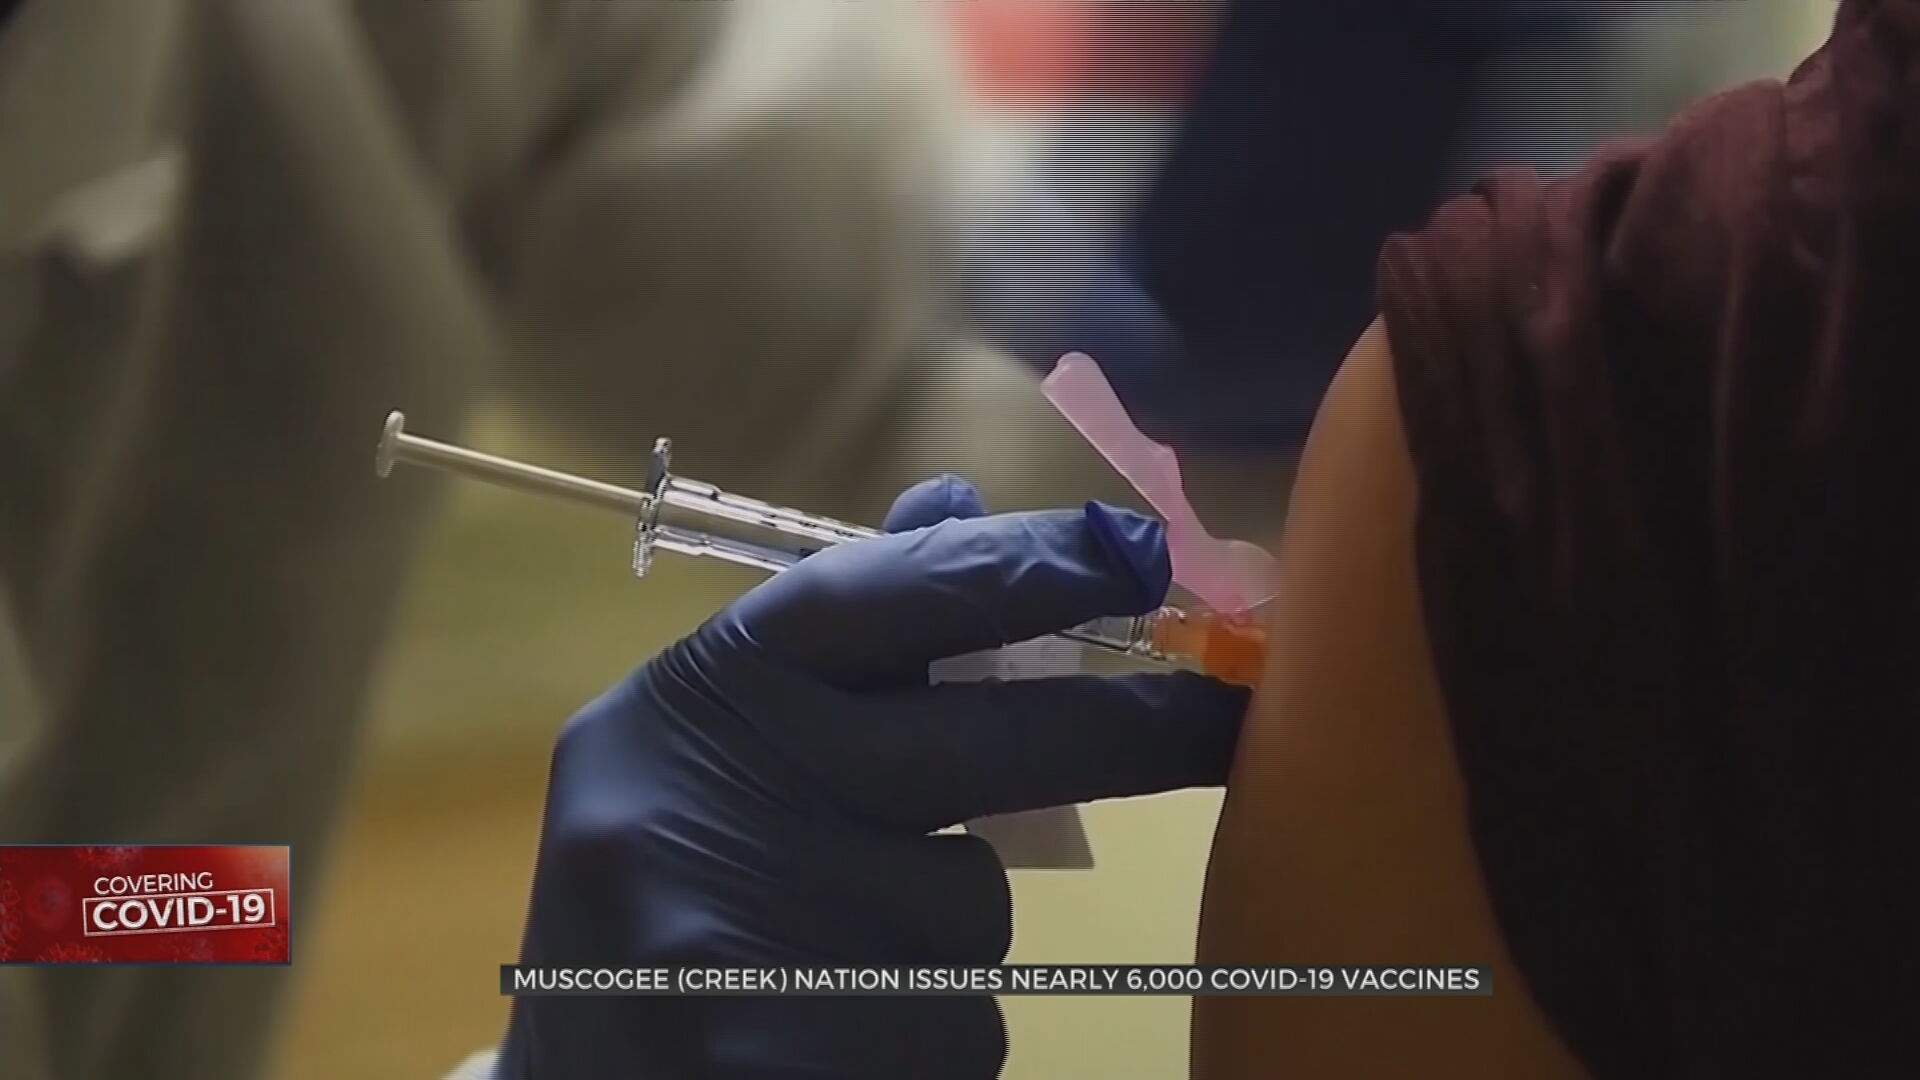 Muscogee (Creek) Nation To Host Drive-Thru COVID-19 Vaccination Event